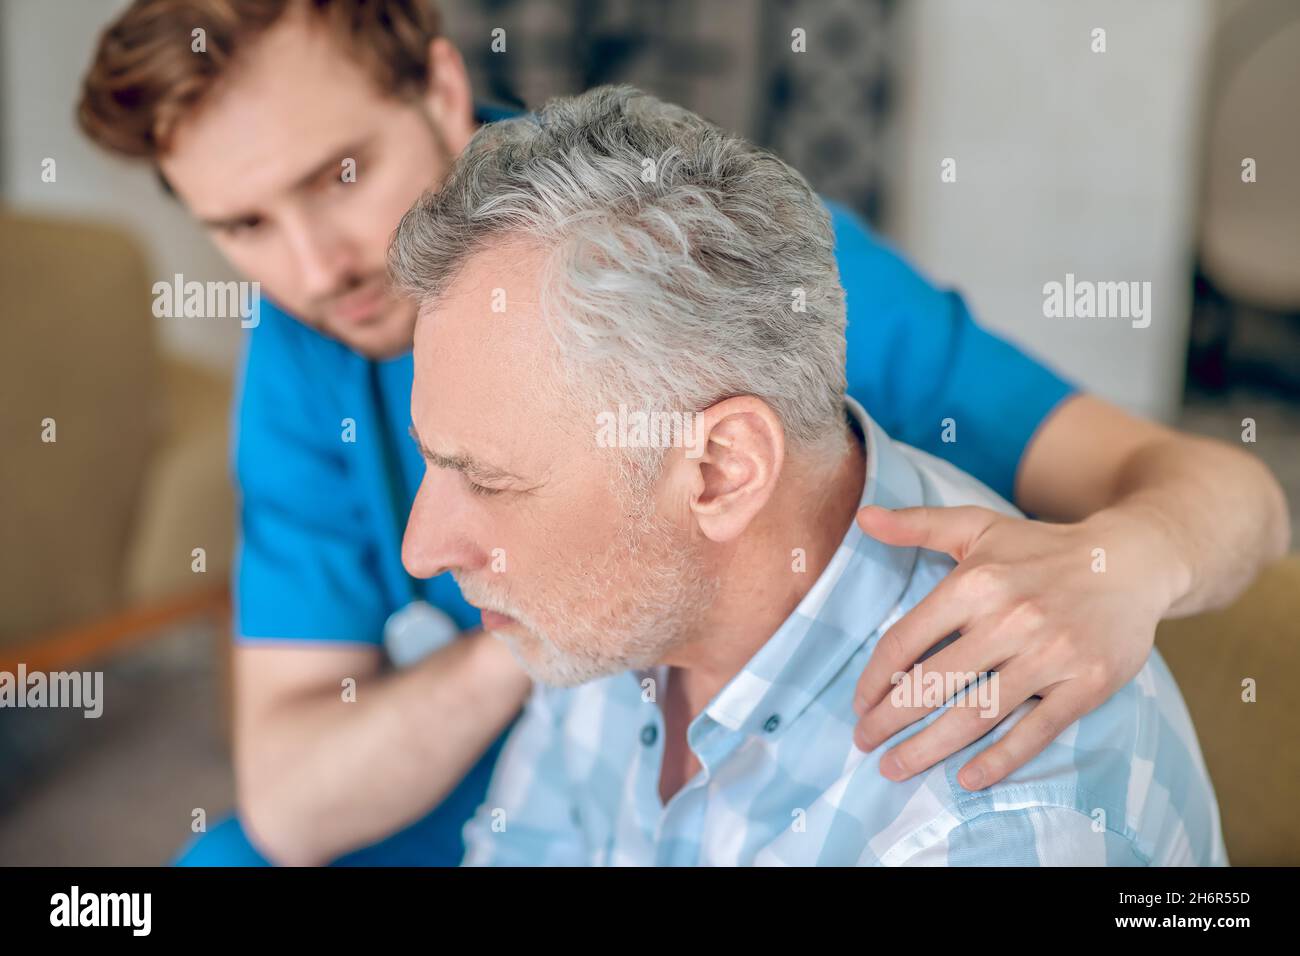 Attentive healthcare professional taking care of his patient Stock Photo